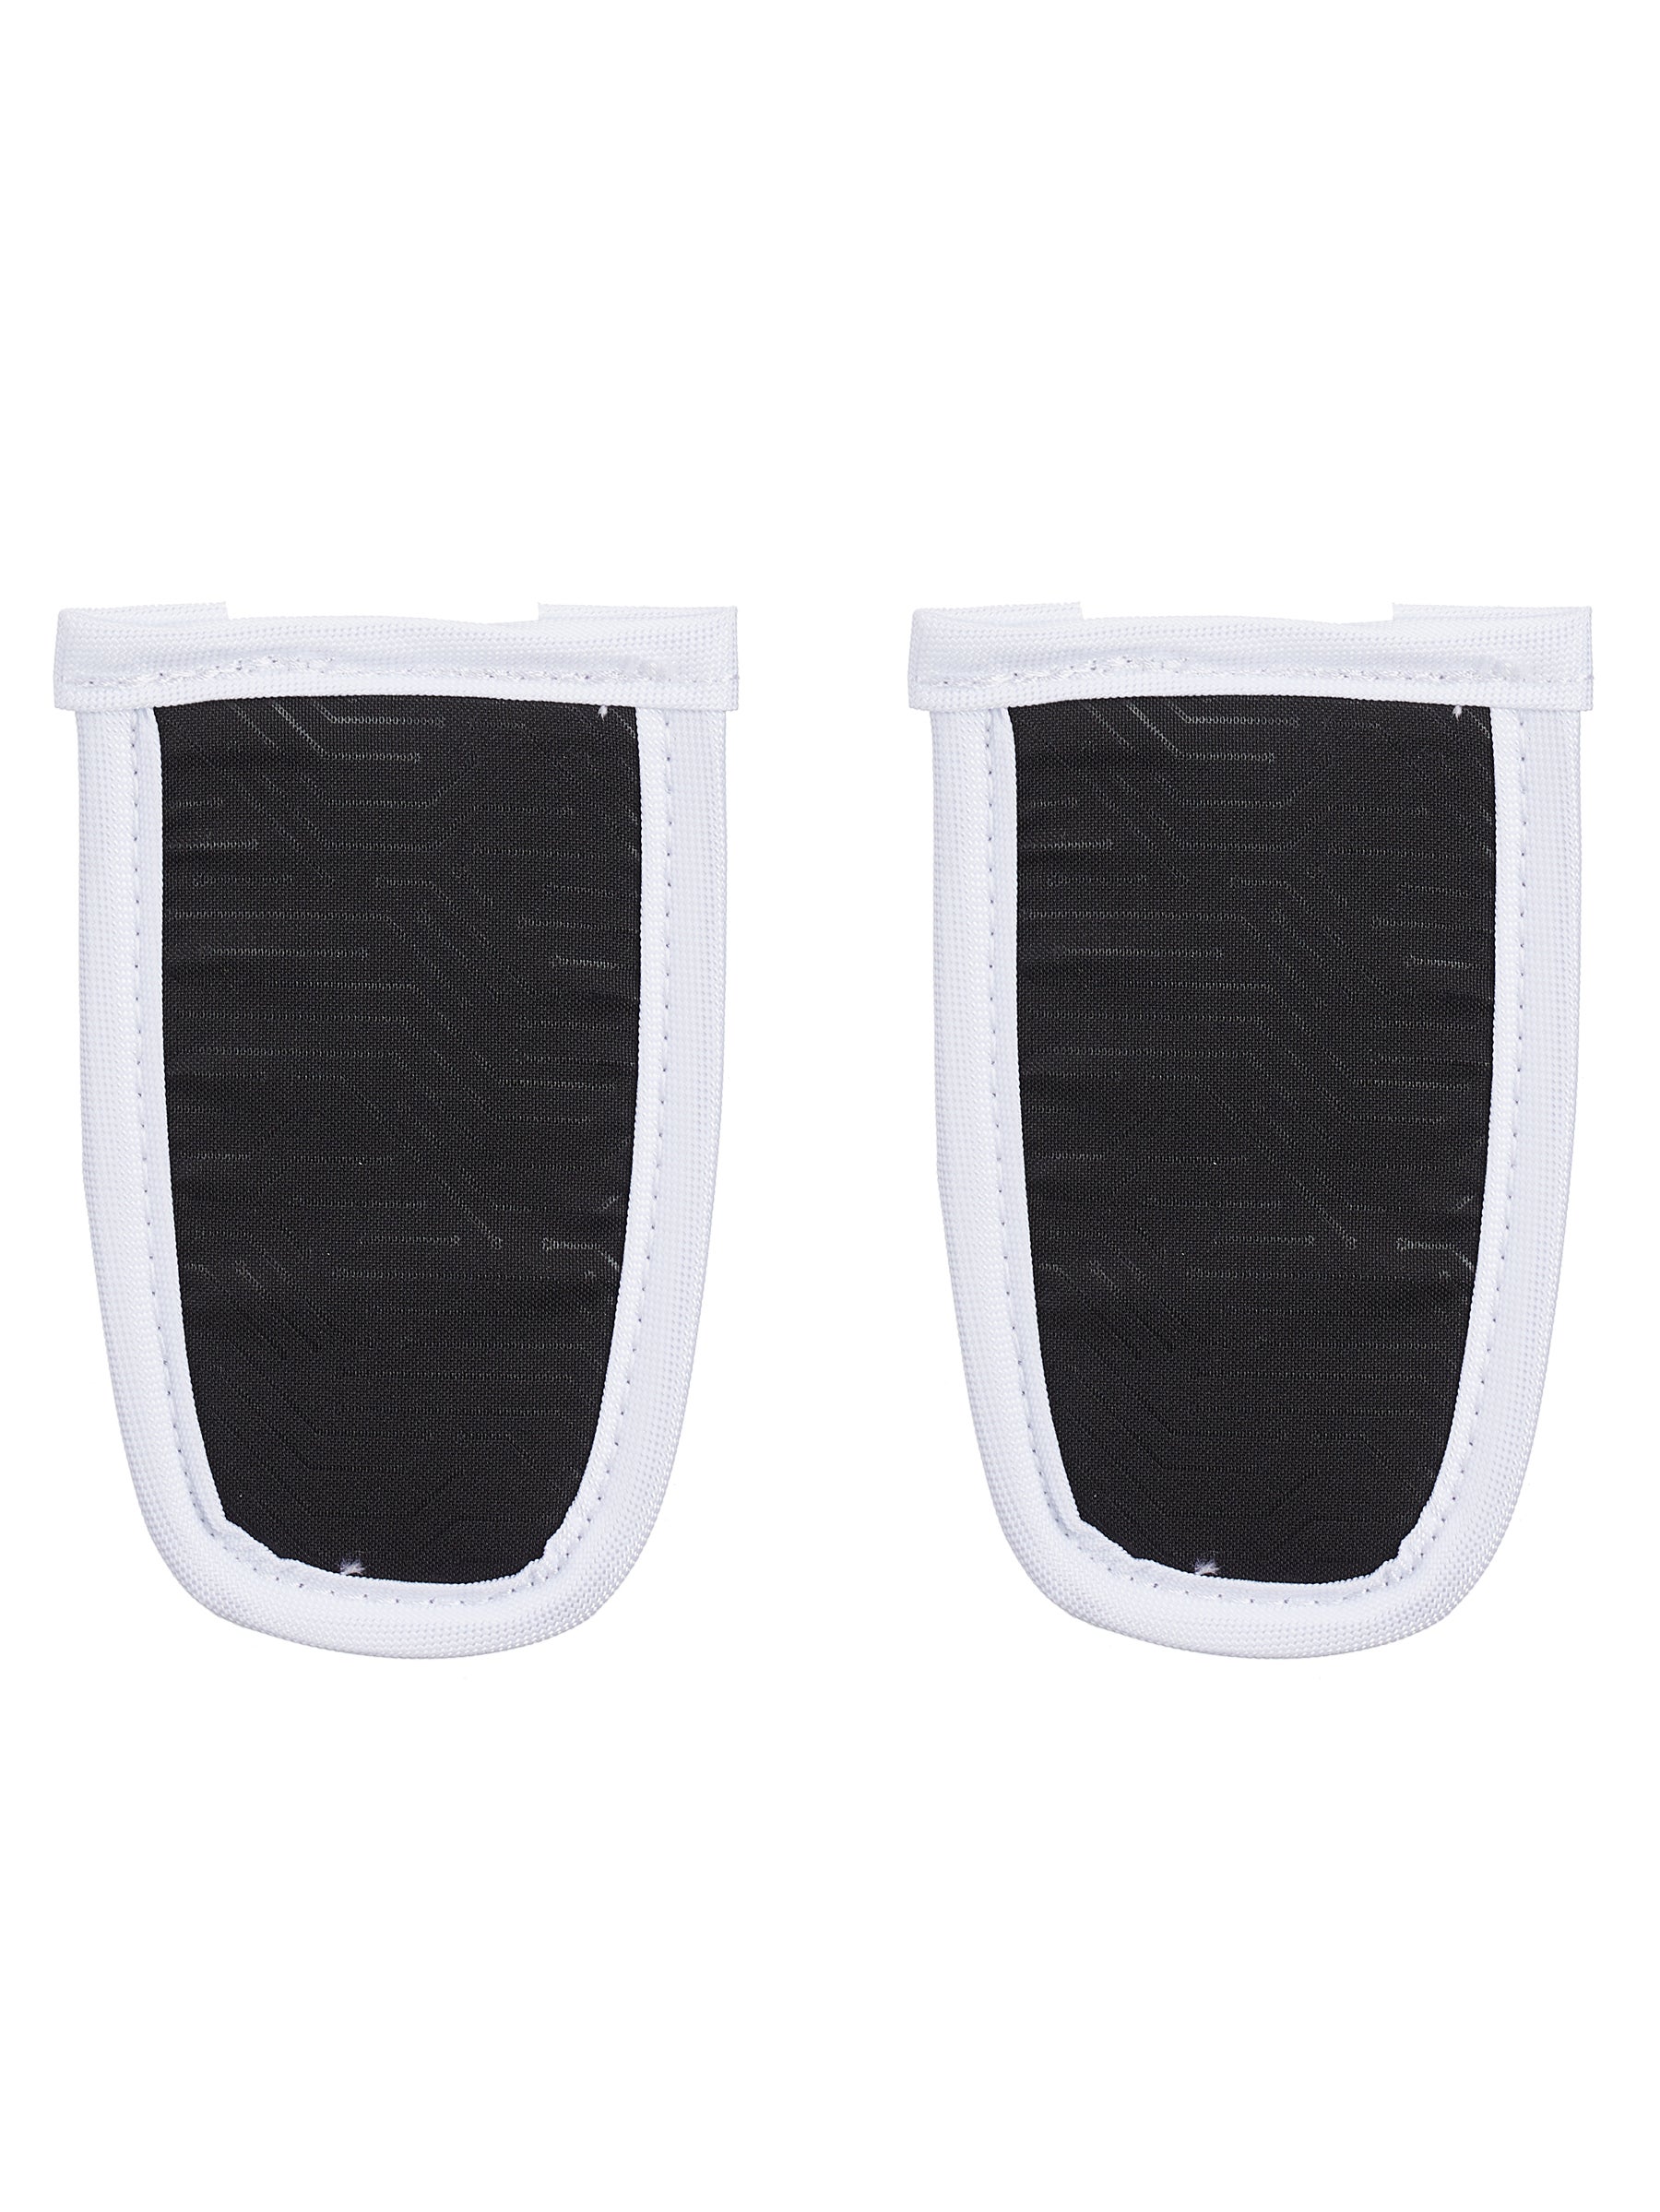 BAHR Toe Elastic Replacement Straps Warrior Hockey Goal Pads Style 2 pack white 